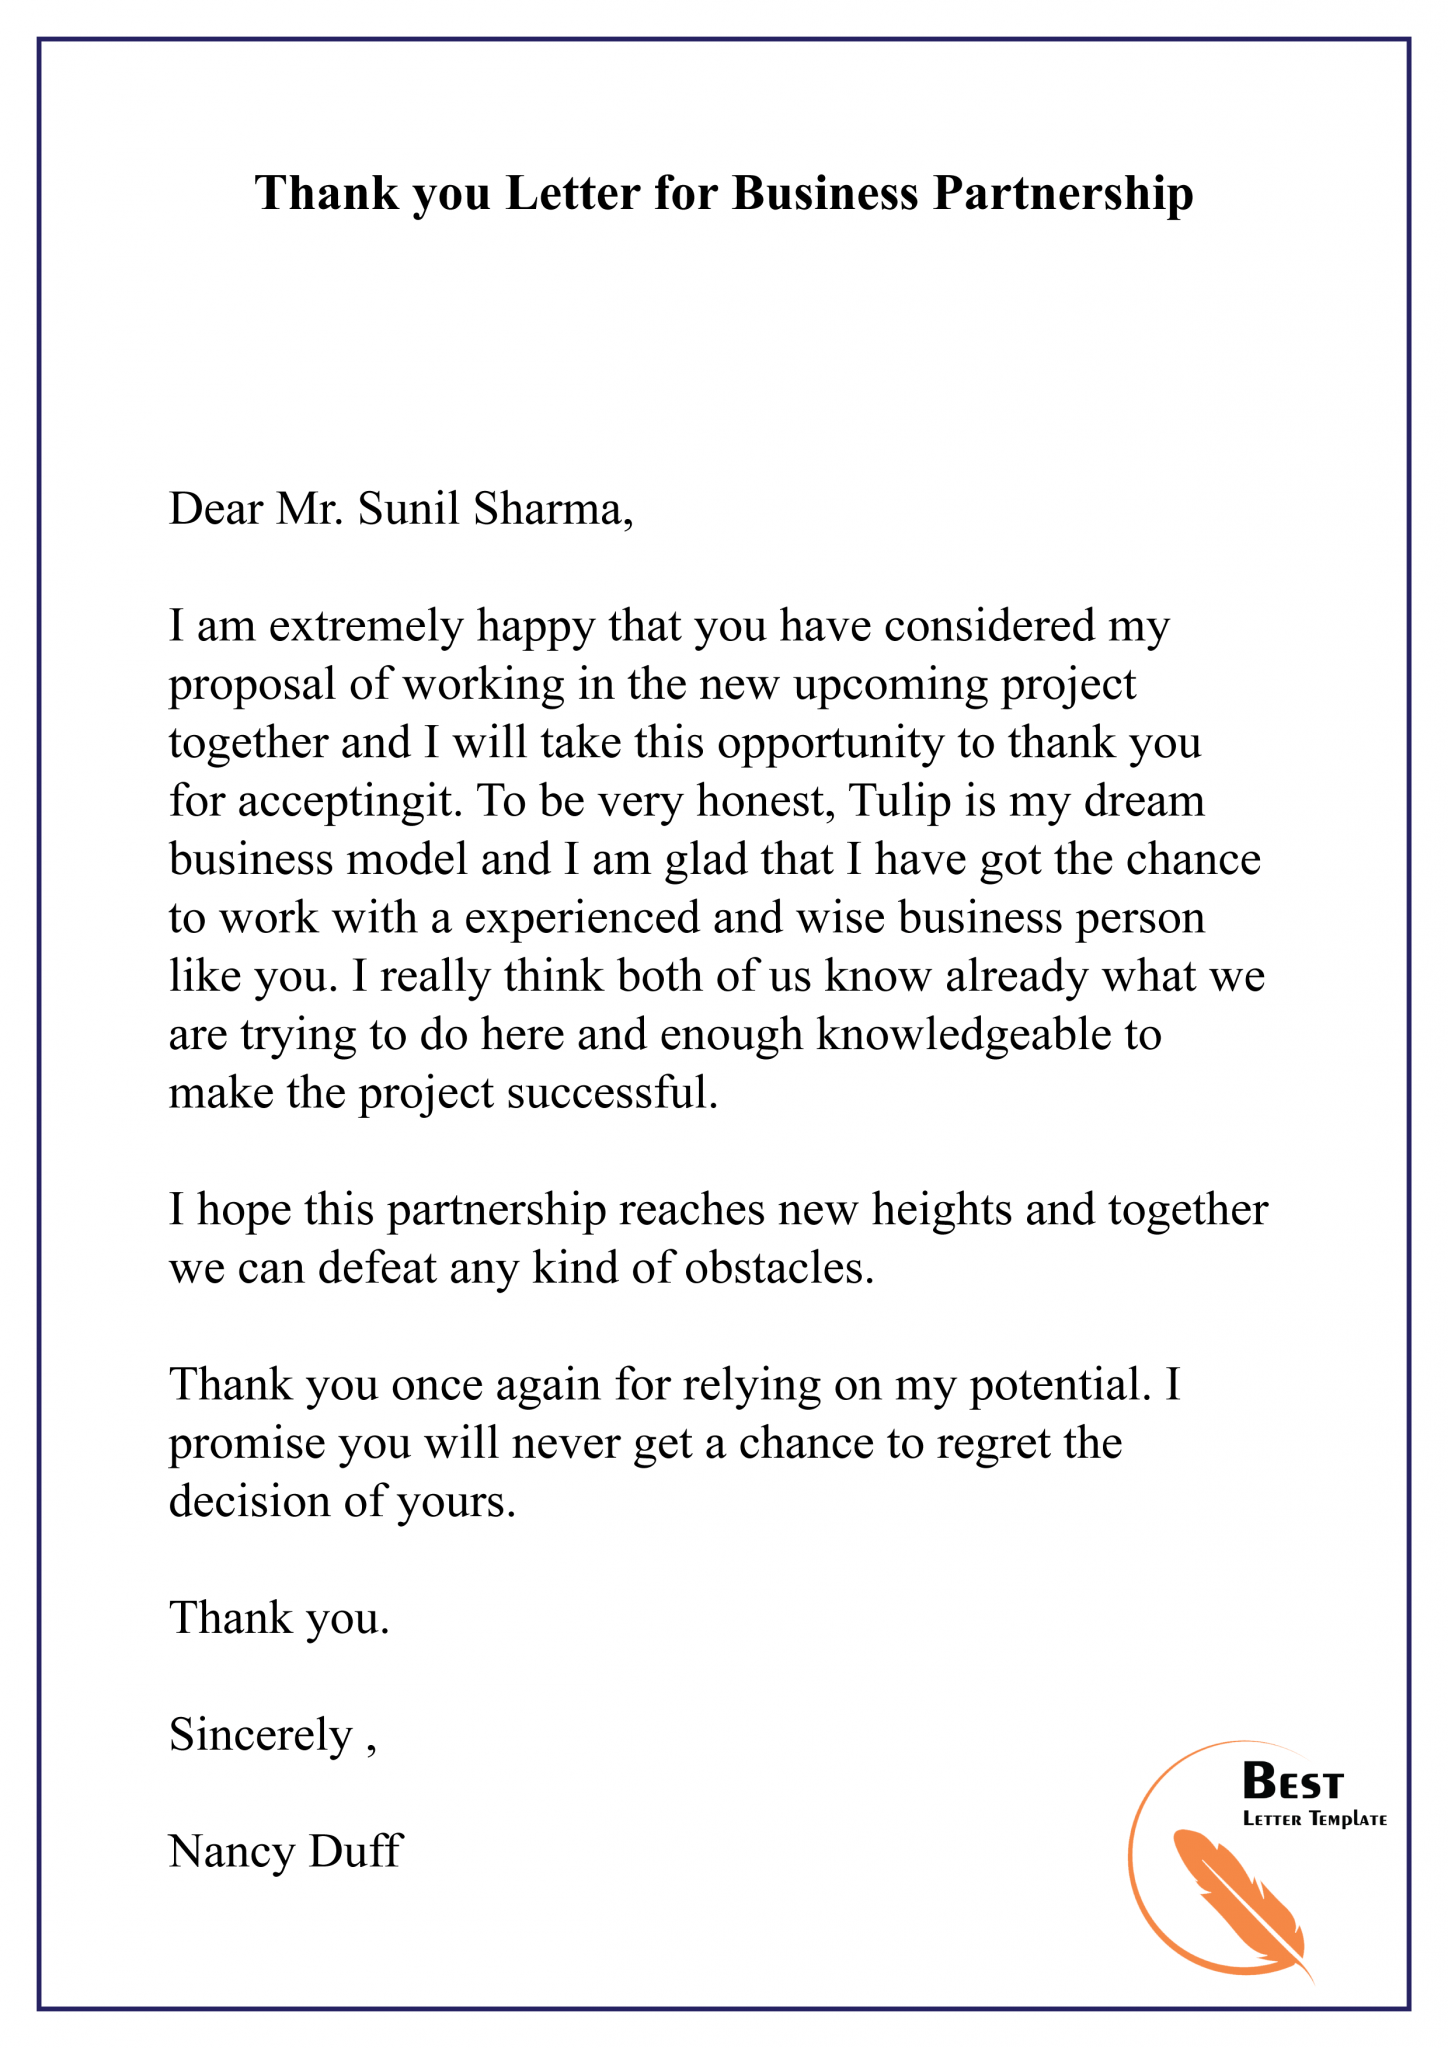 Sample Thank You Letter Template for Business Partnership